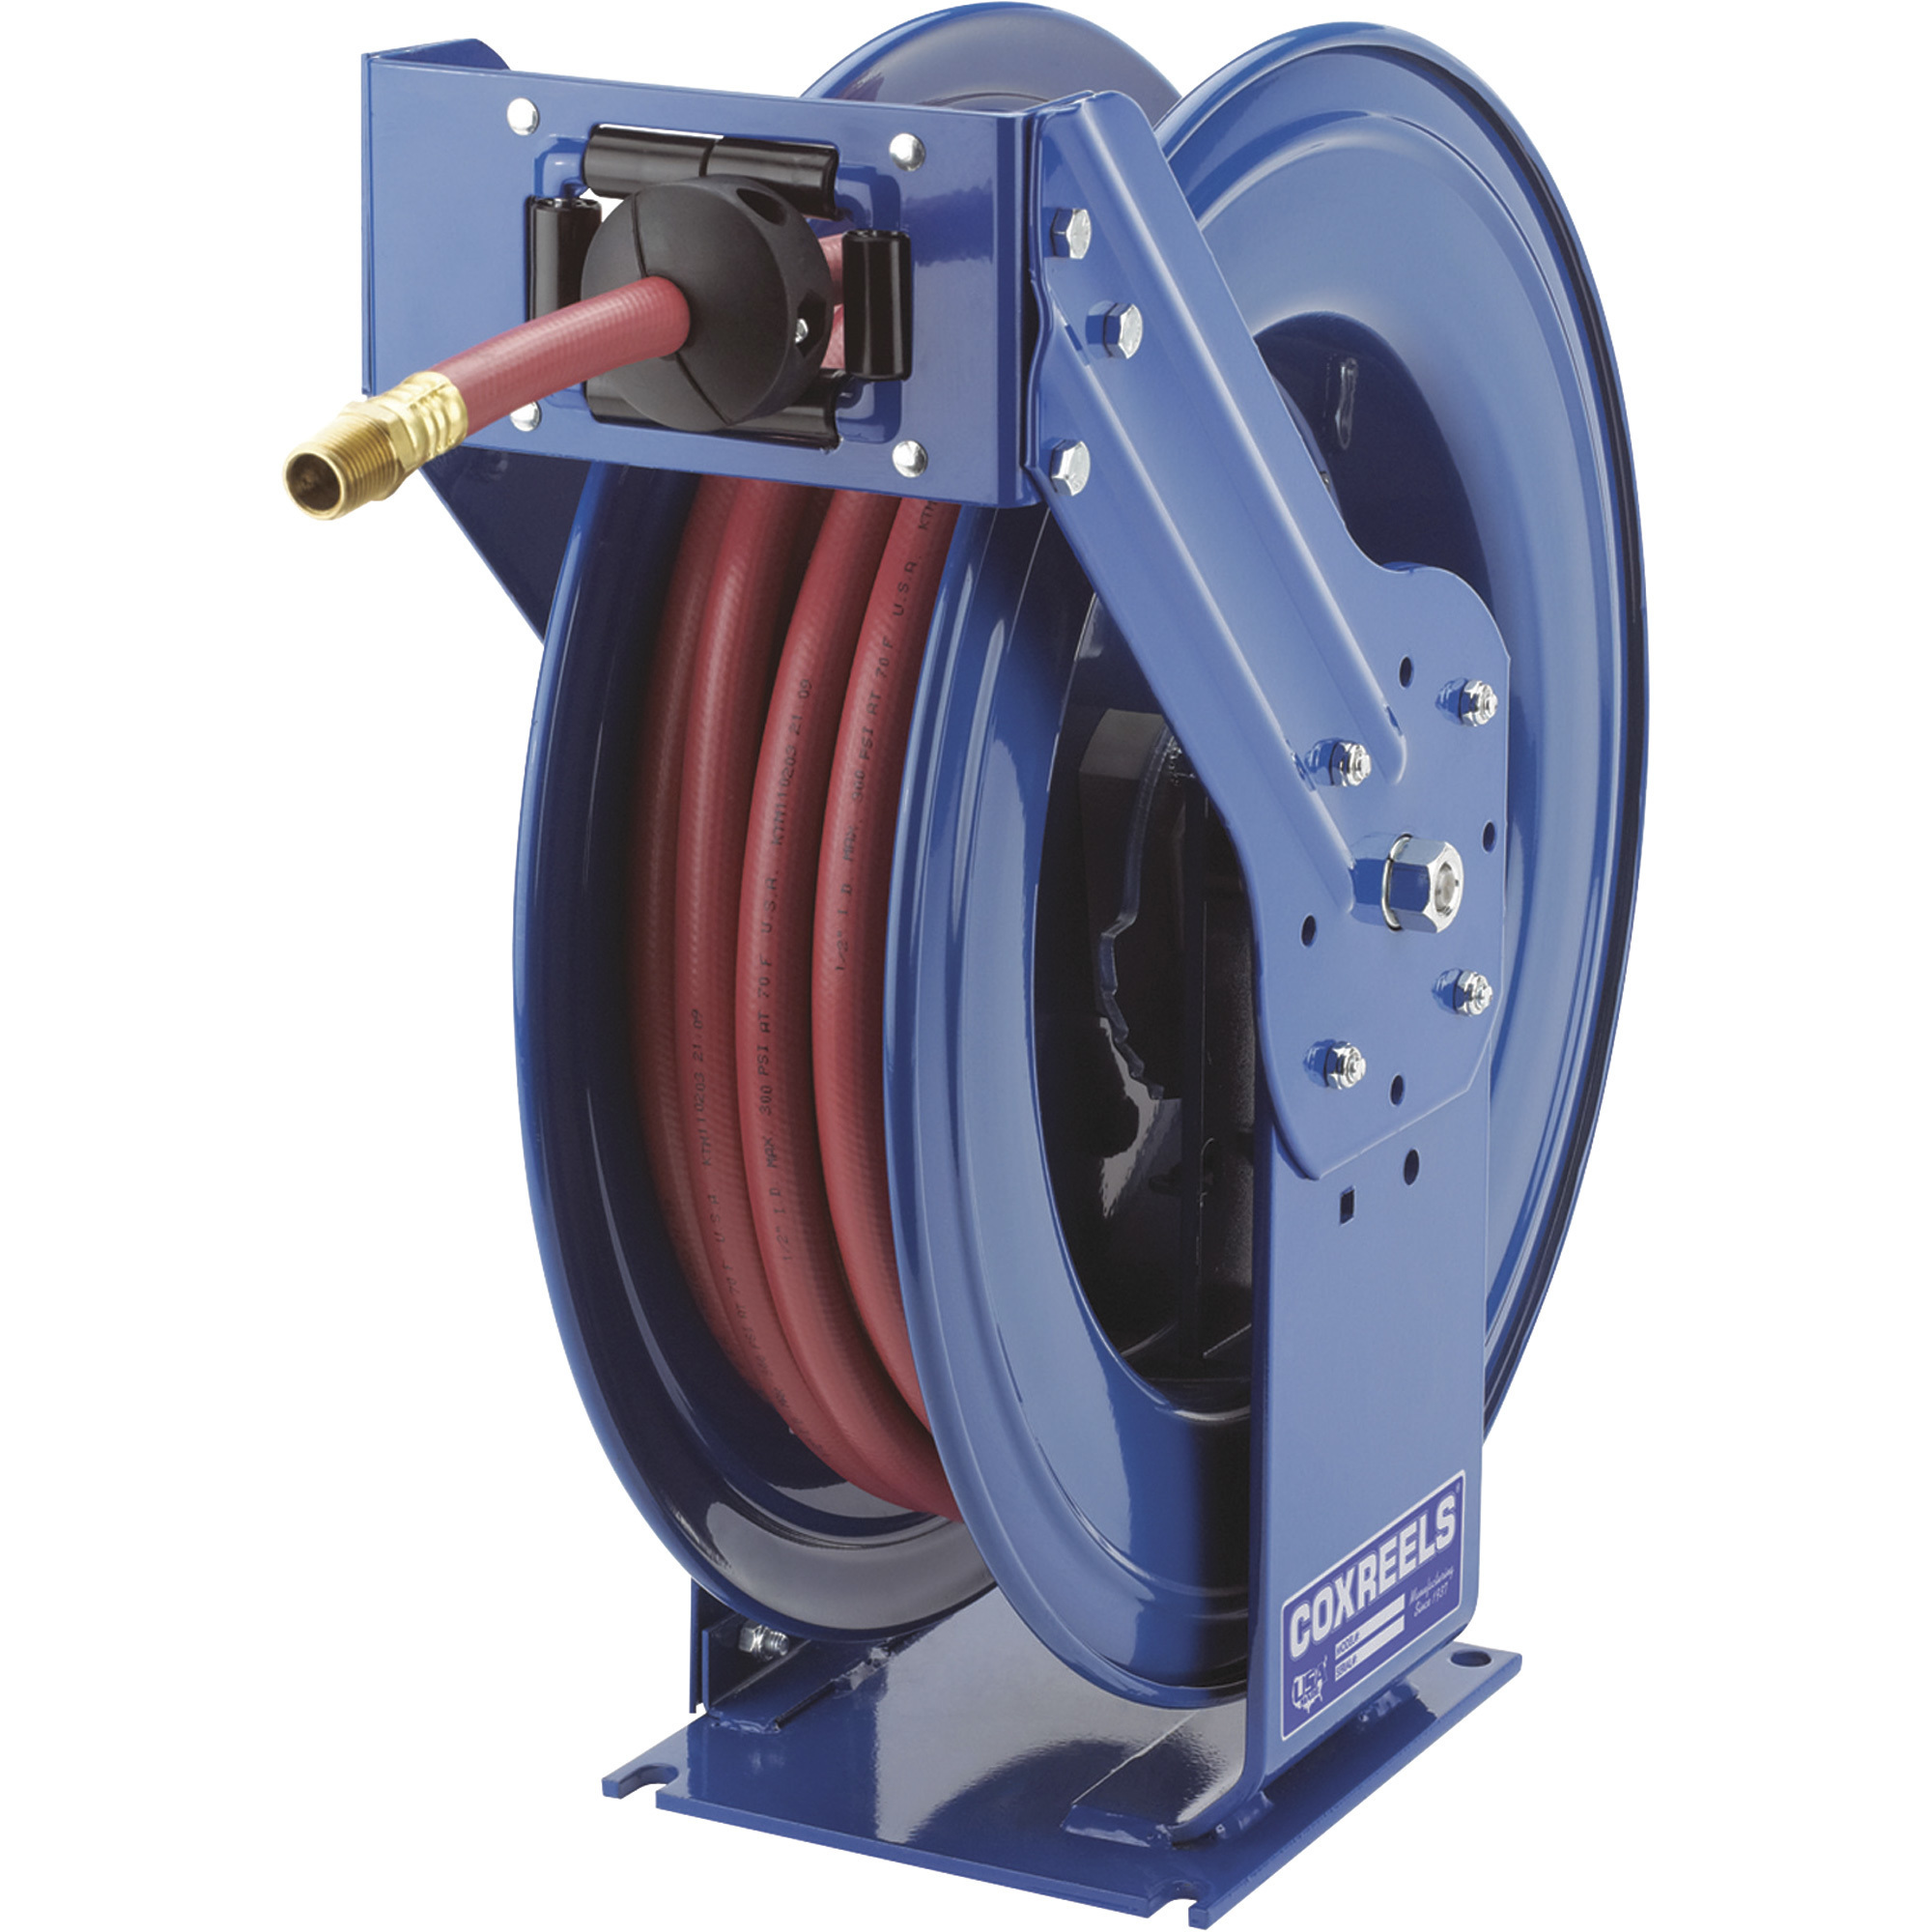 Coxreels Manual Rewind Hose Reel, Holds 3/8in. x 100ft. Hose, Max